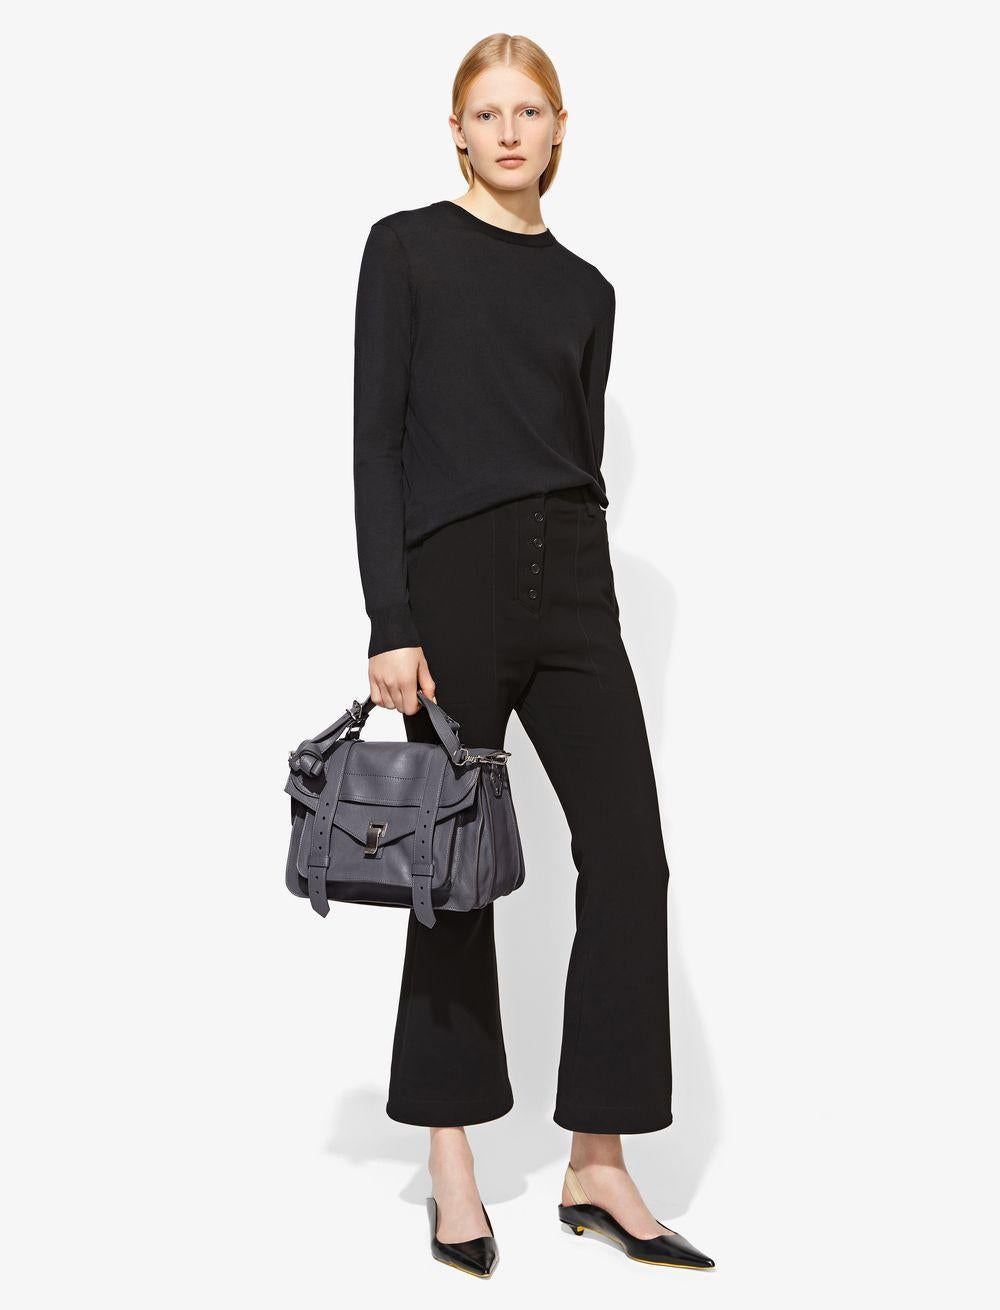 Proenza Schouler PS1 Medium Heather Grey Leather Satchel Bag.  Original retail price $2100.  Features one interior compartment and a smaller leather trimmed zip pocket.  Lambskin leather, sculpted top handle, removable adjustable long shoulder